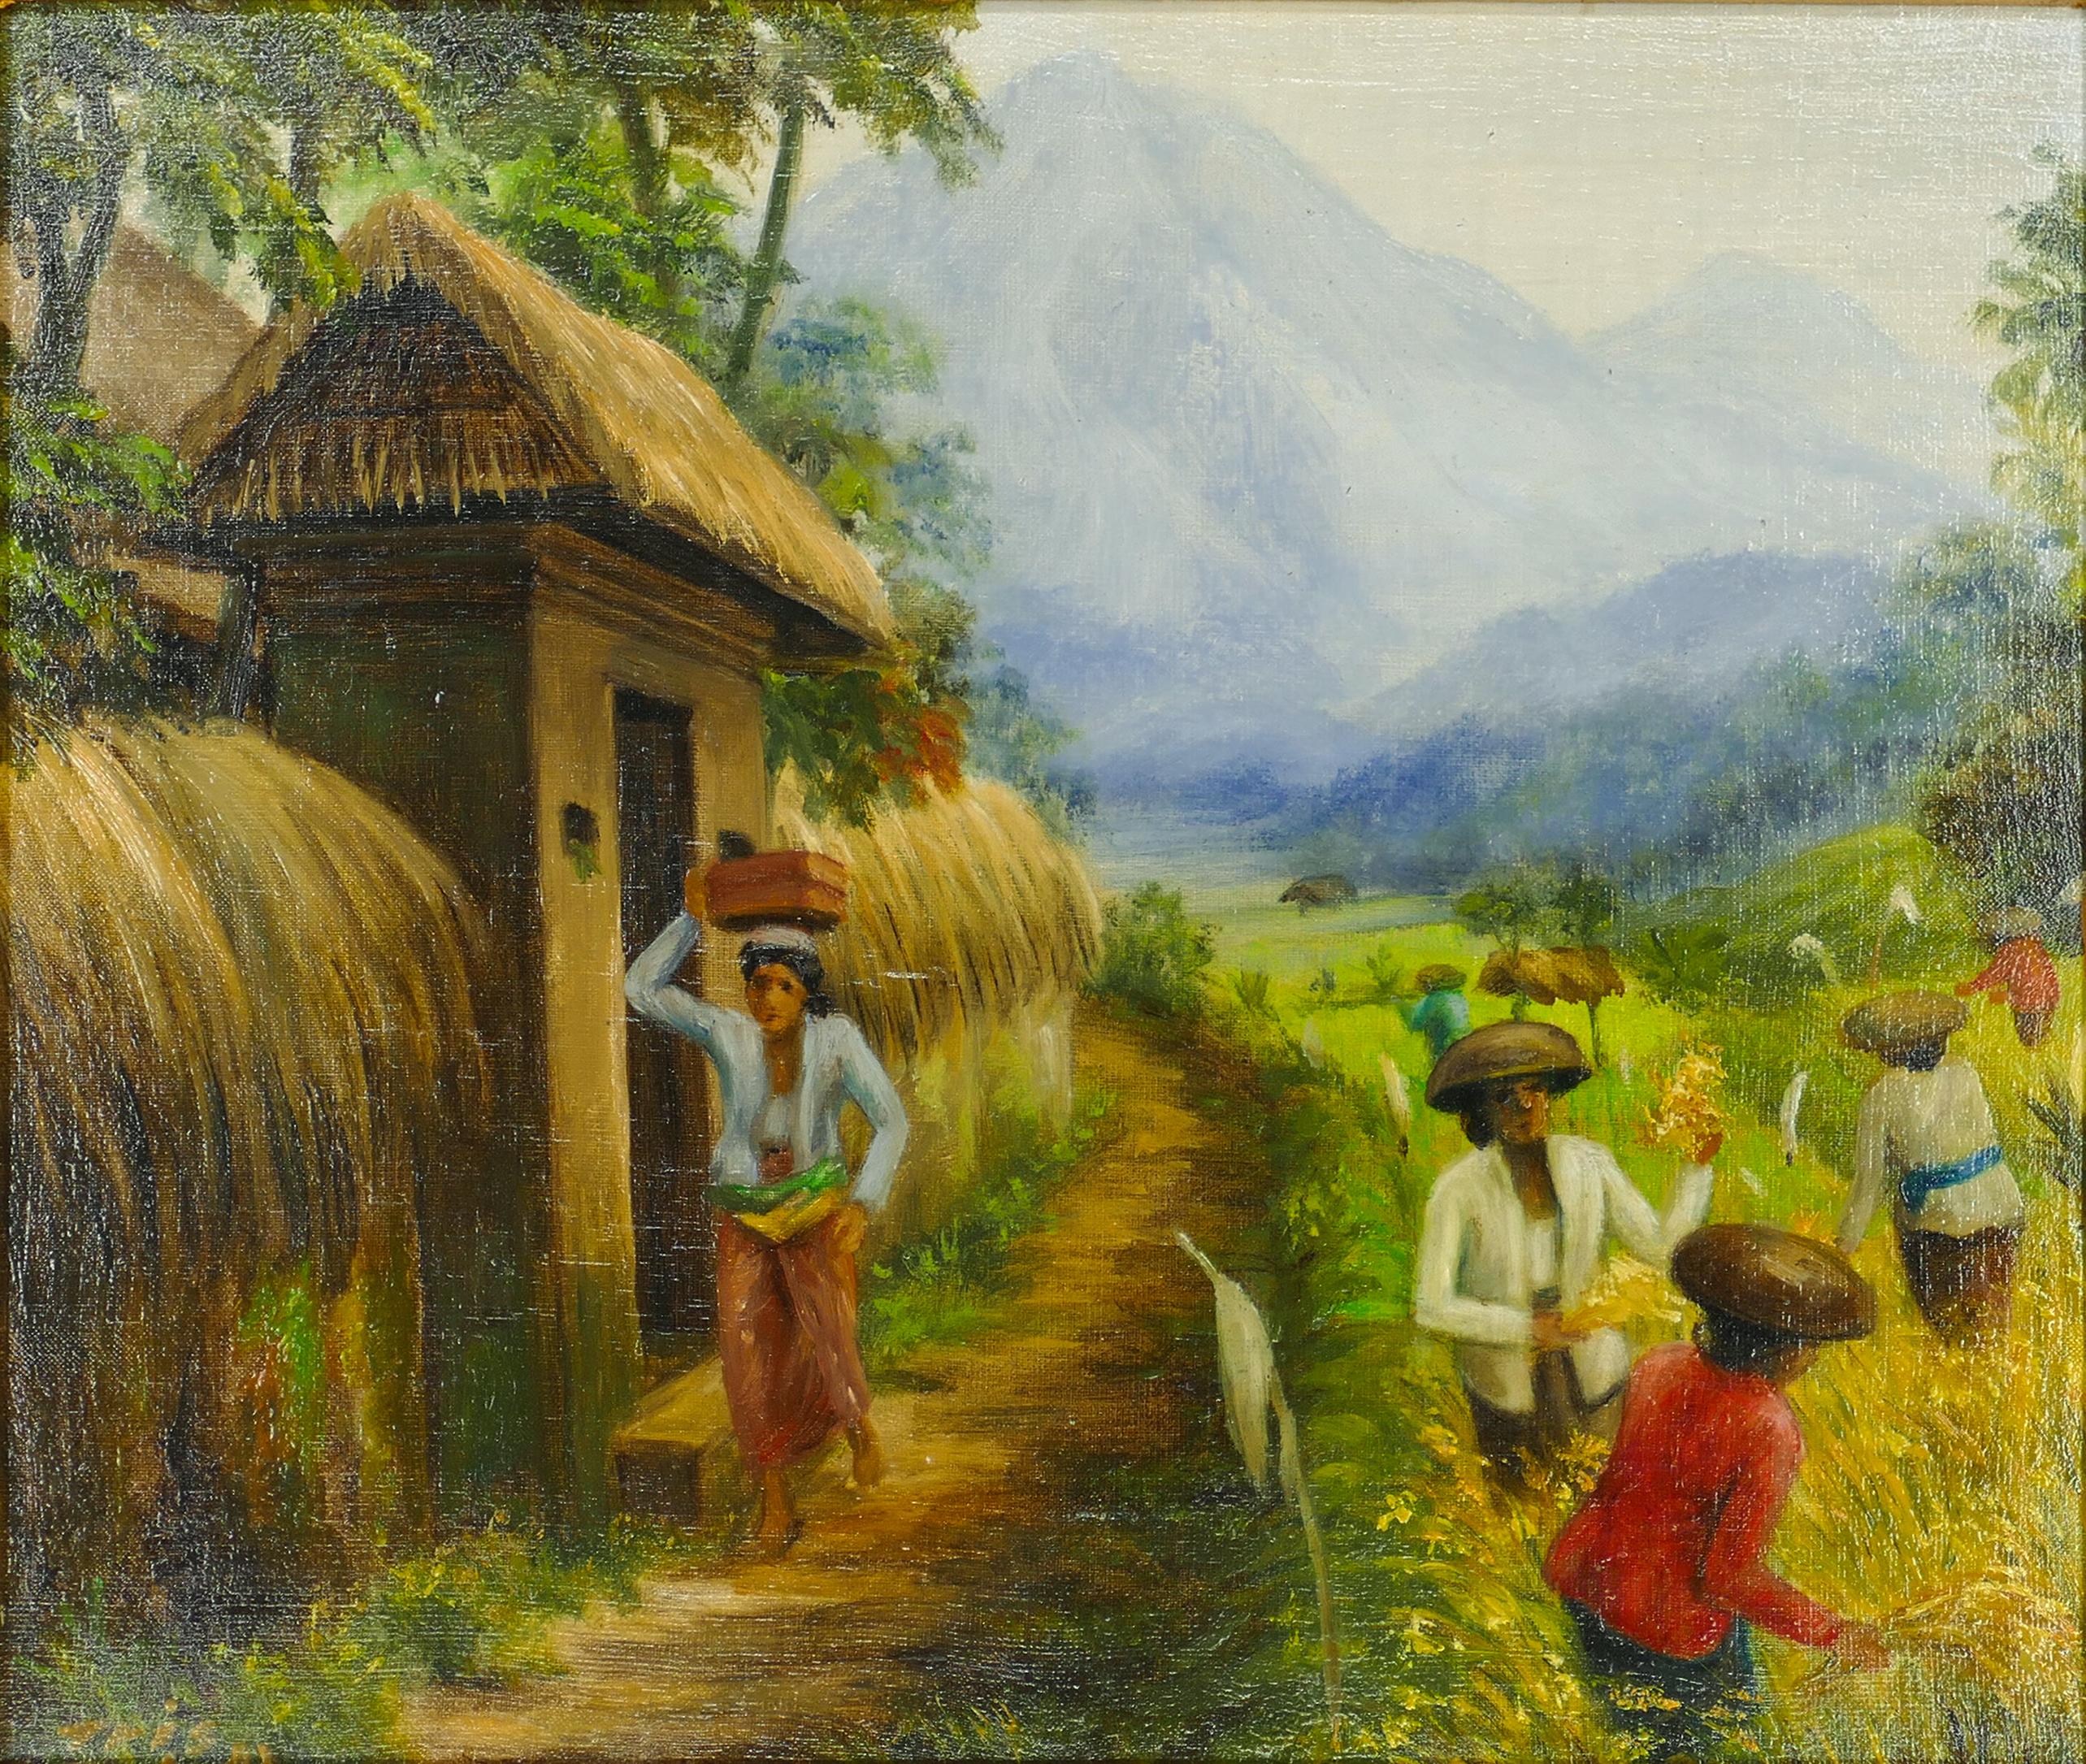 Rice Weeders at Work - Oil on Canvas Bali School - Mid 20th Century